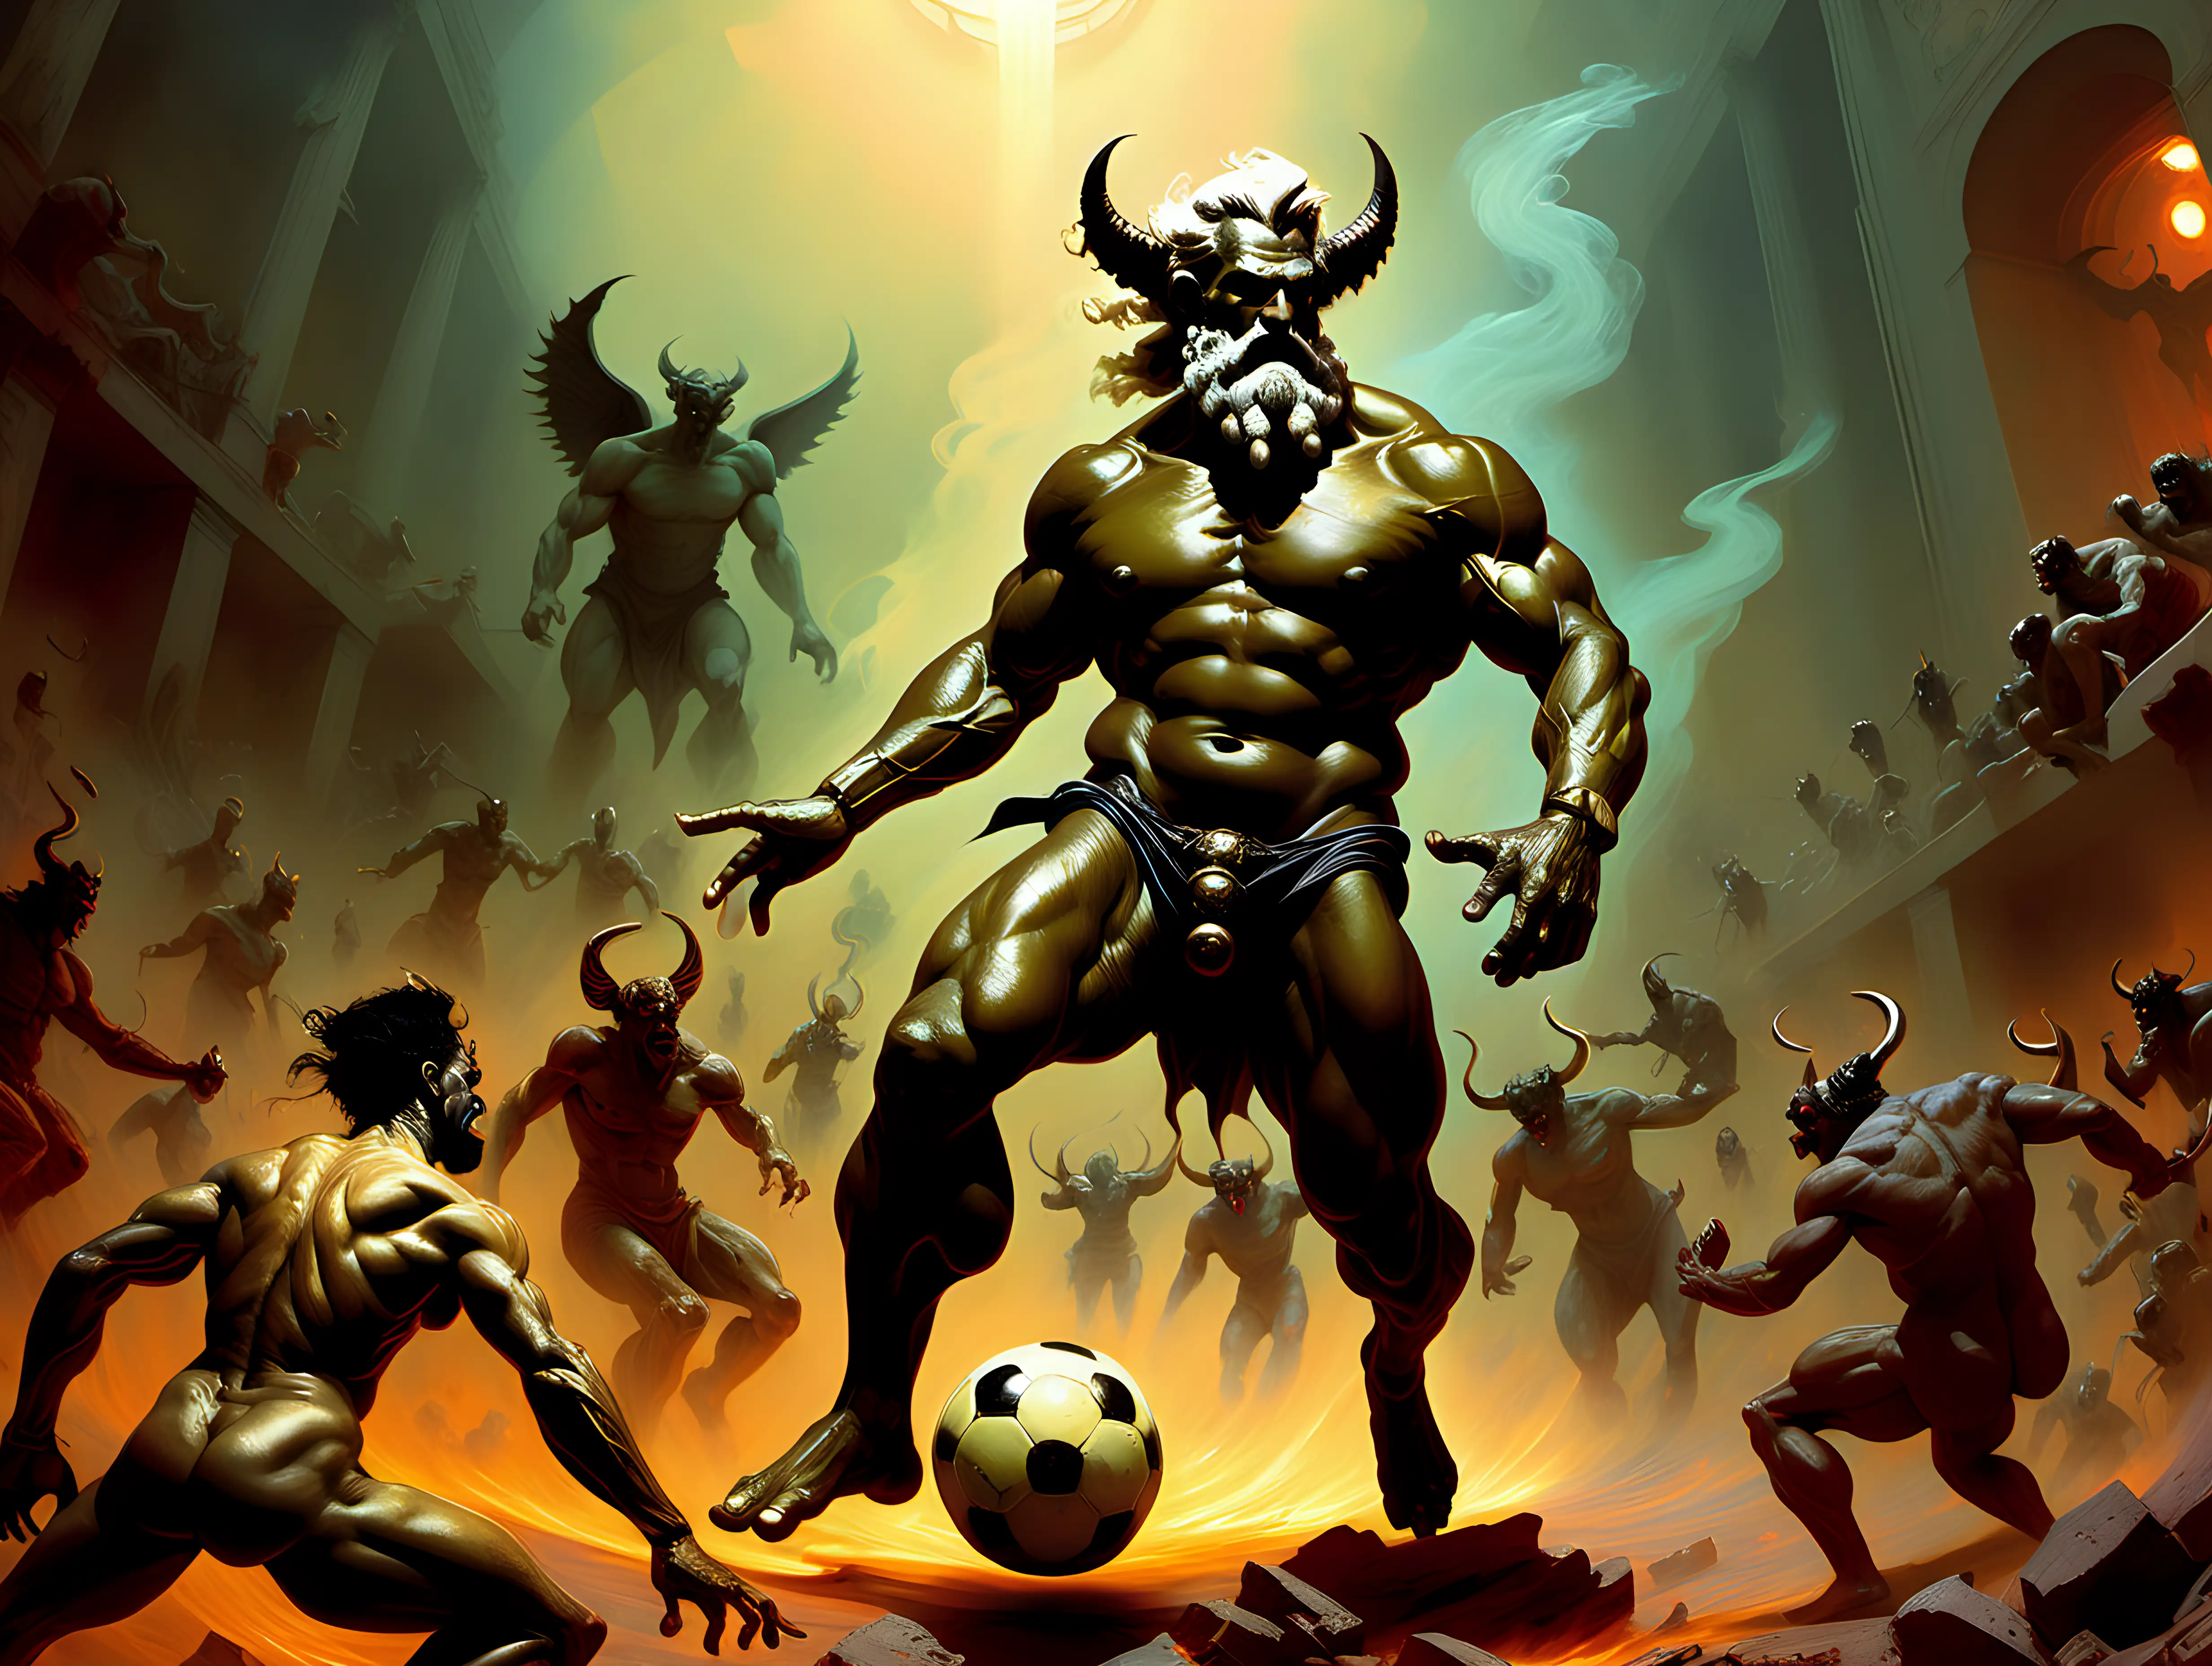 Zeus playing soccer against demons in  Hell in style of cyberpunk by frank frazetta